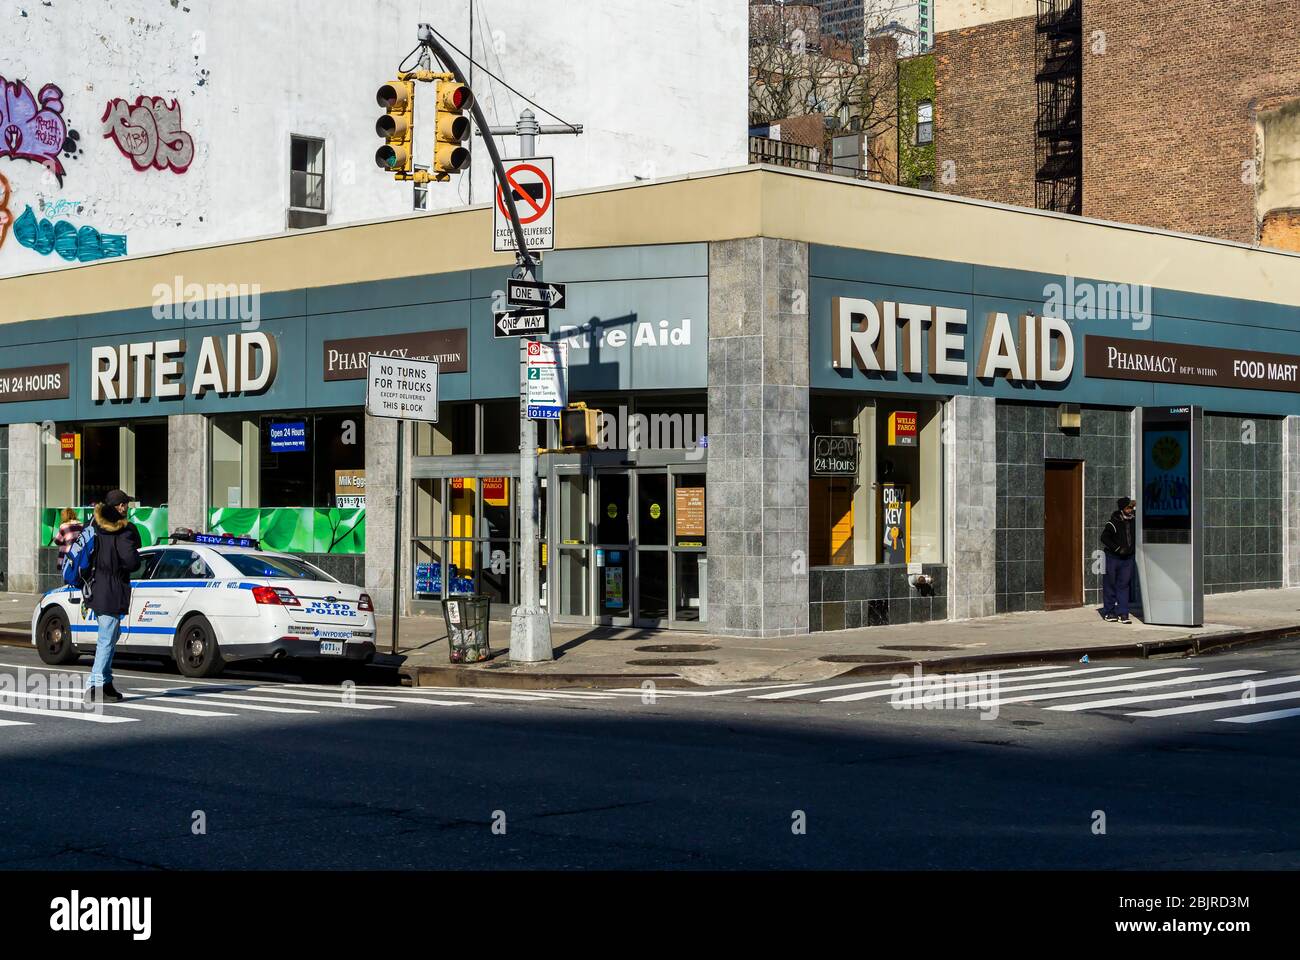 A Store In The Rite Aid Drugstore Chain In Chelsea In New York On Tuesday April 21 2020 Richard B Levine 2BJRD3M 